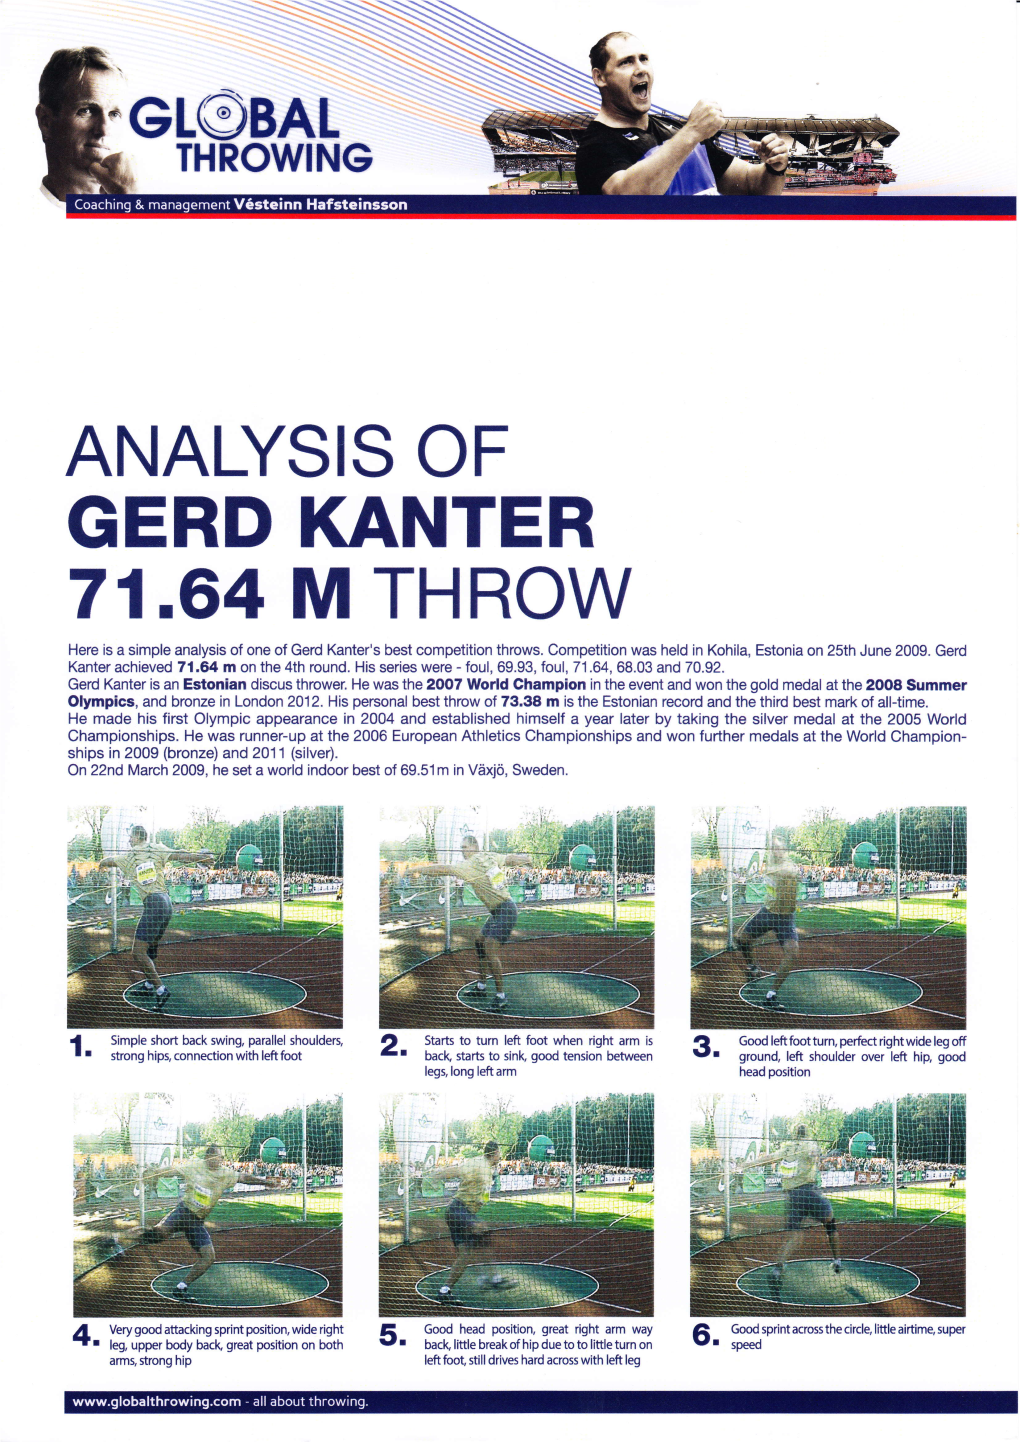 71.64 M THROW Here Is a Simple Analysis of One of Gerd Kanter's Best Competitiofl Thows